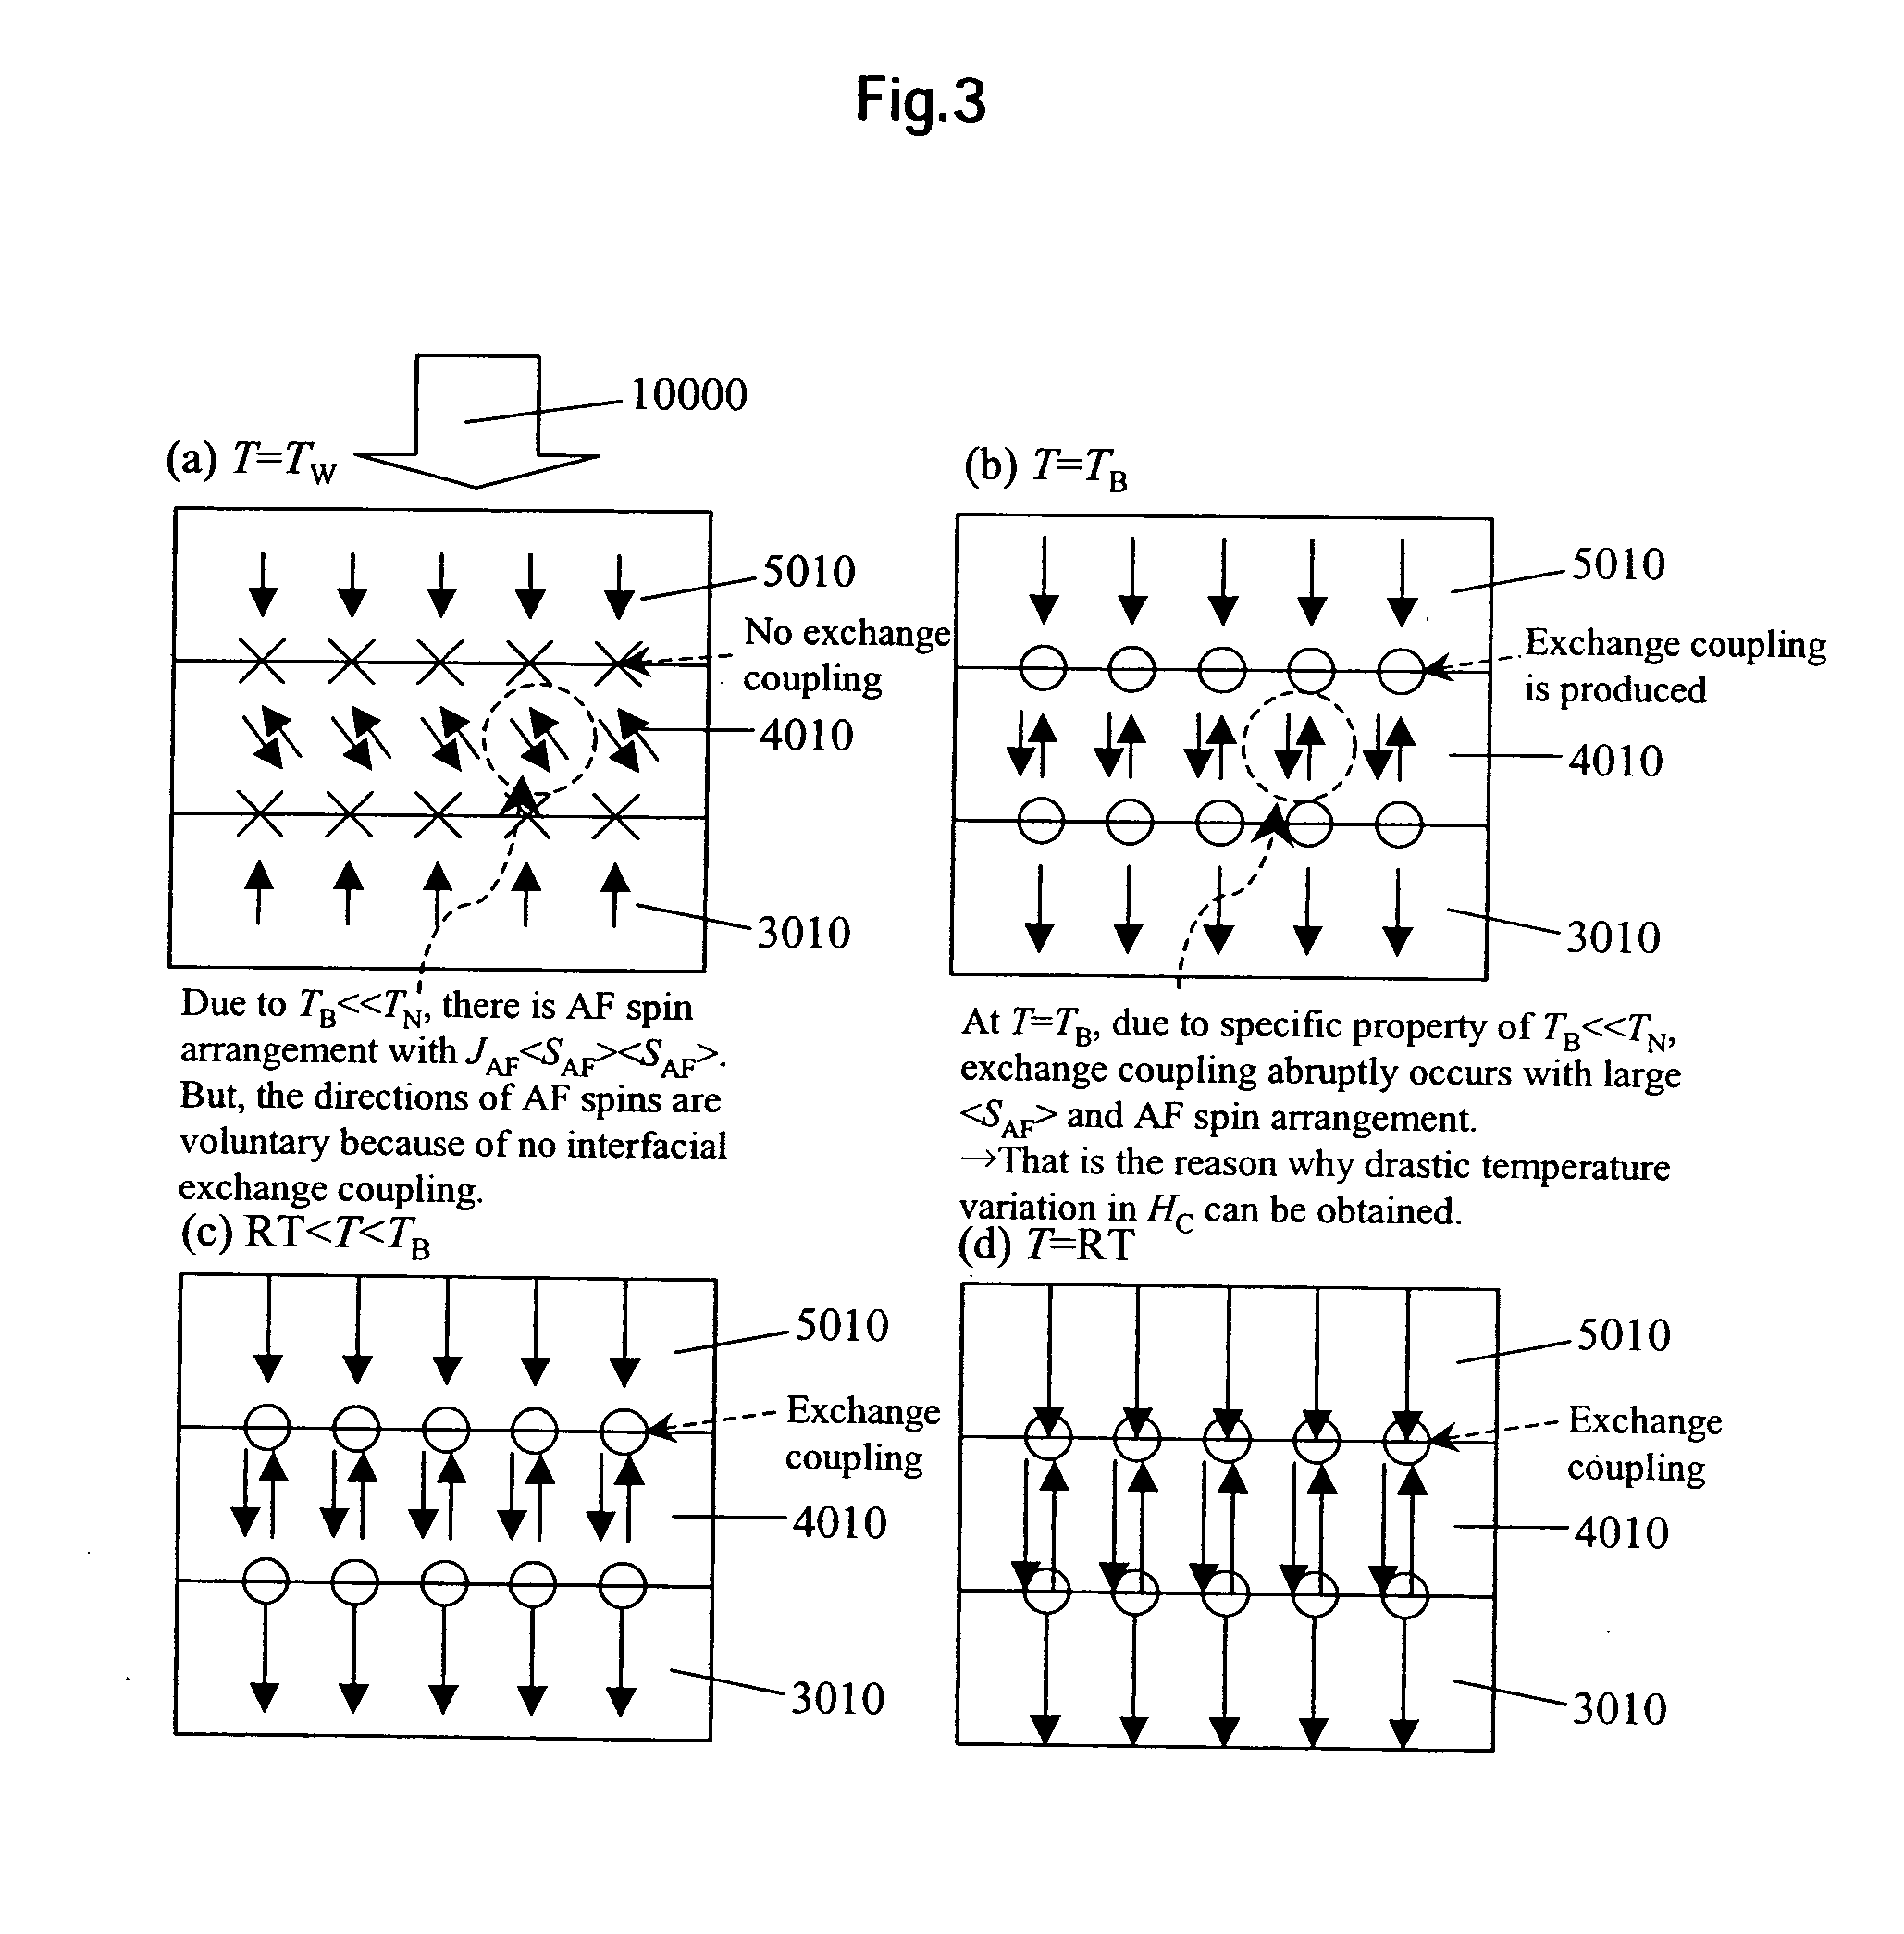 Thermally assisted magnetic recording media and magnetic recording and reproducing apparatus